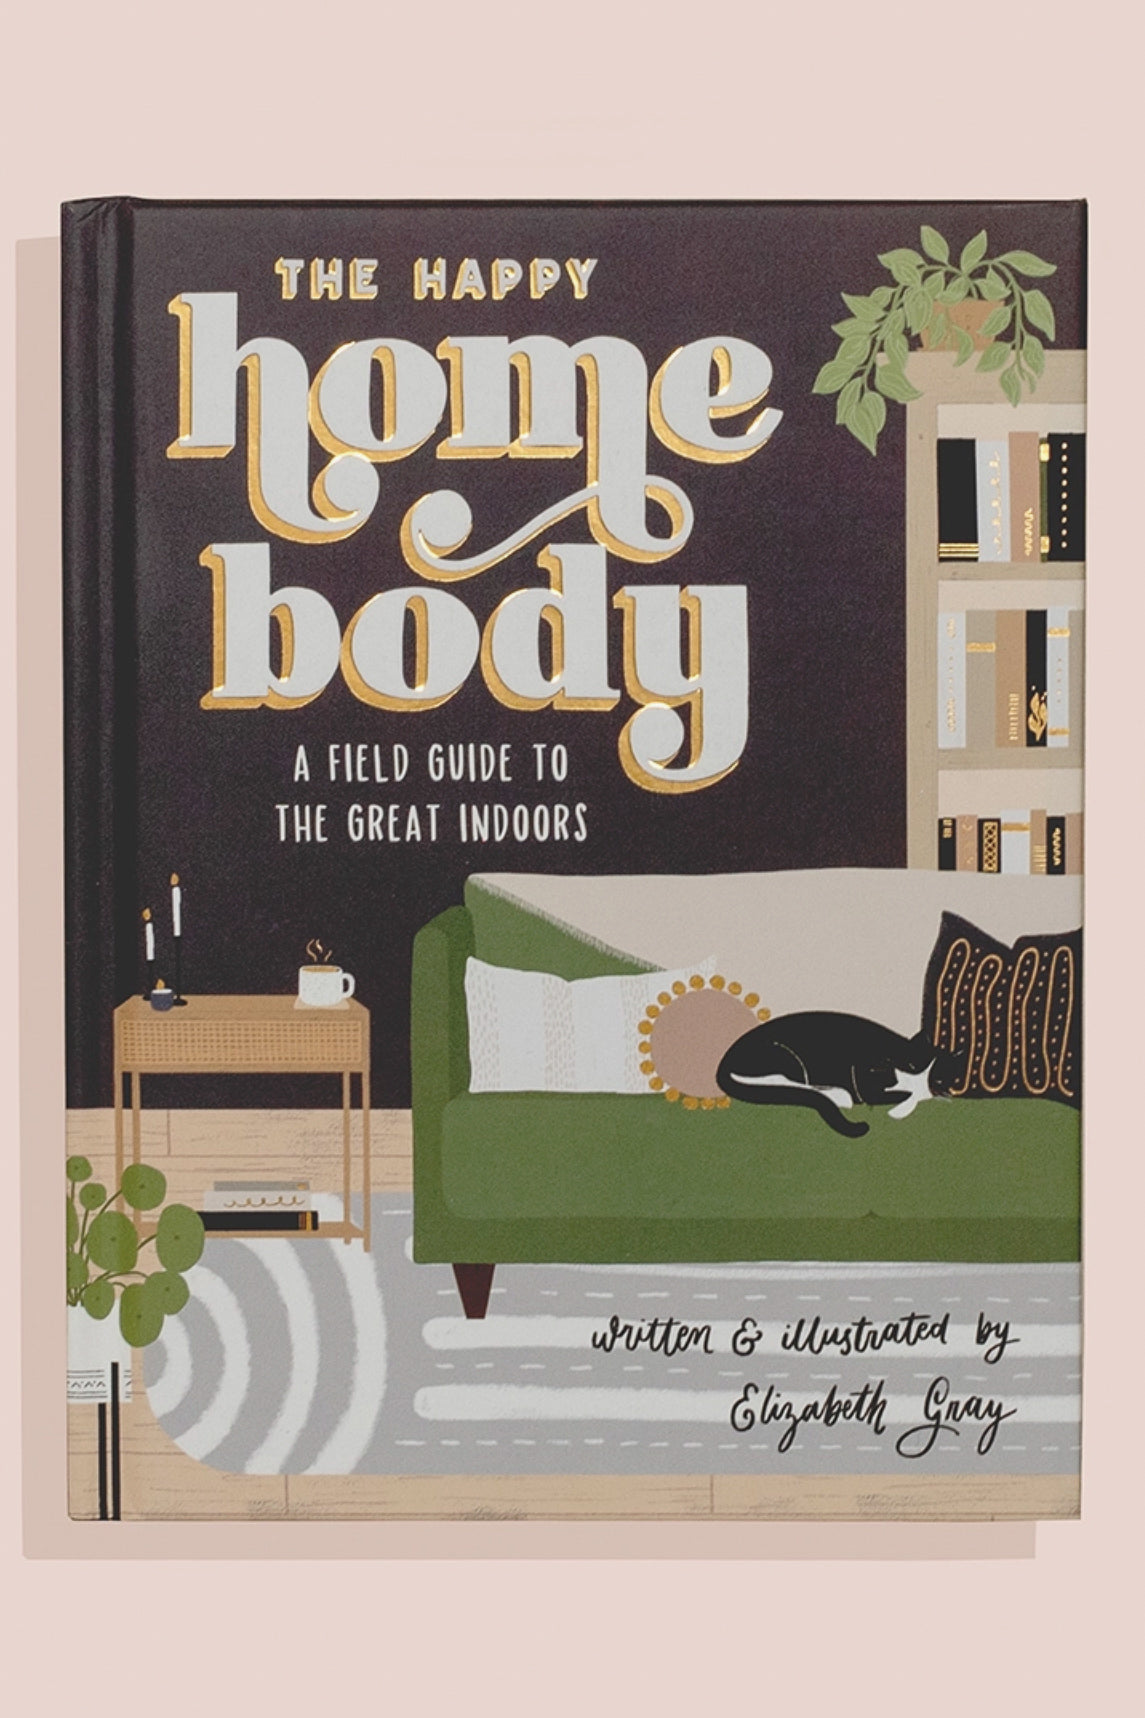 The Happy Homebody: A Field Guide To the Great Indoors Book